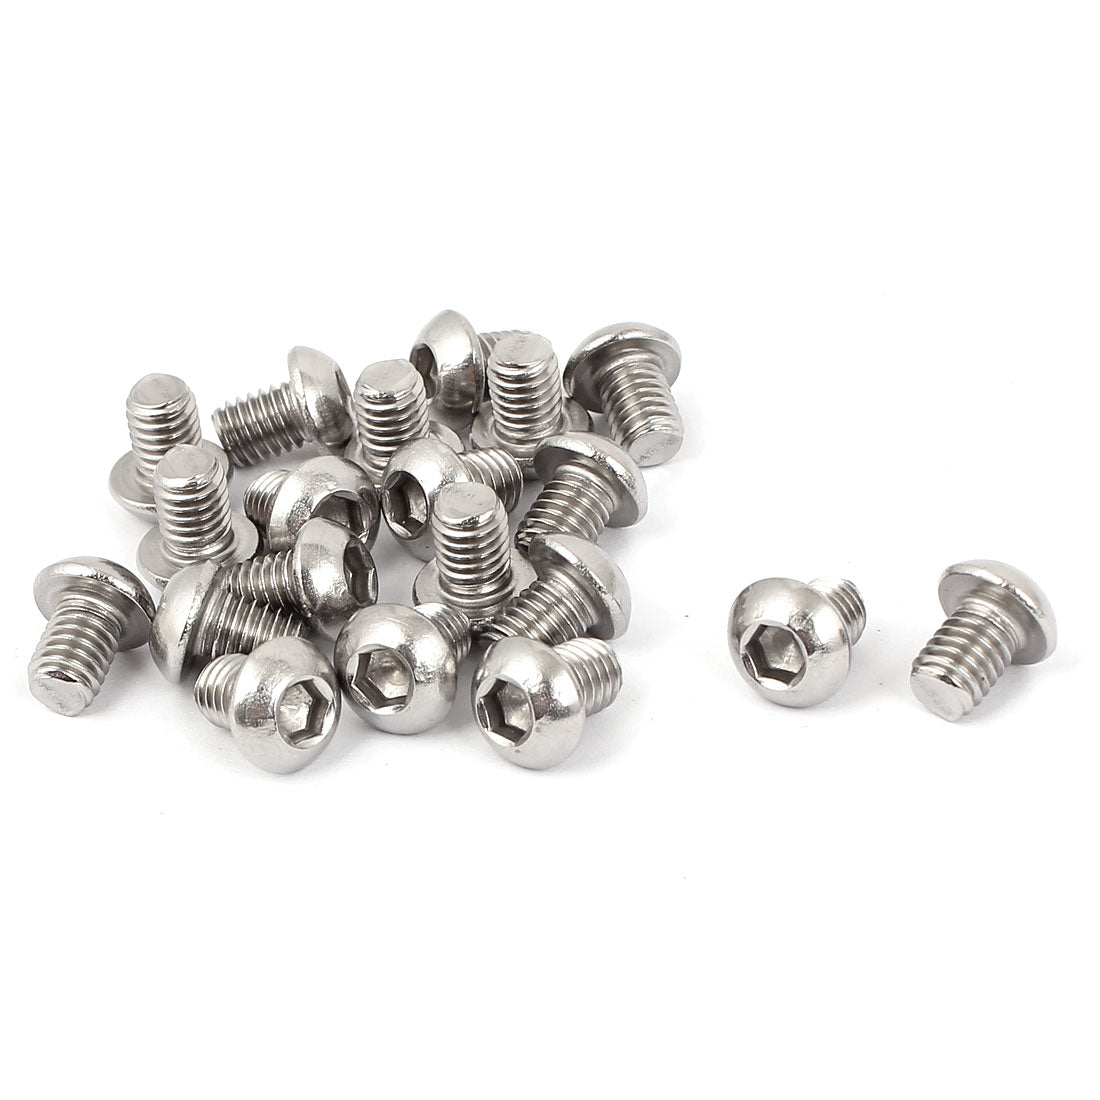 uxcell Uxcell M6 x 8mm Stainless Steel Button Head Socket Cap Screw 20 Pcs